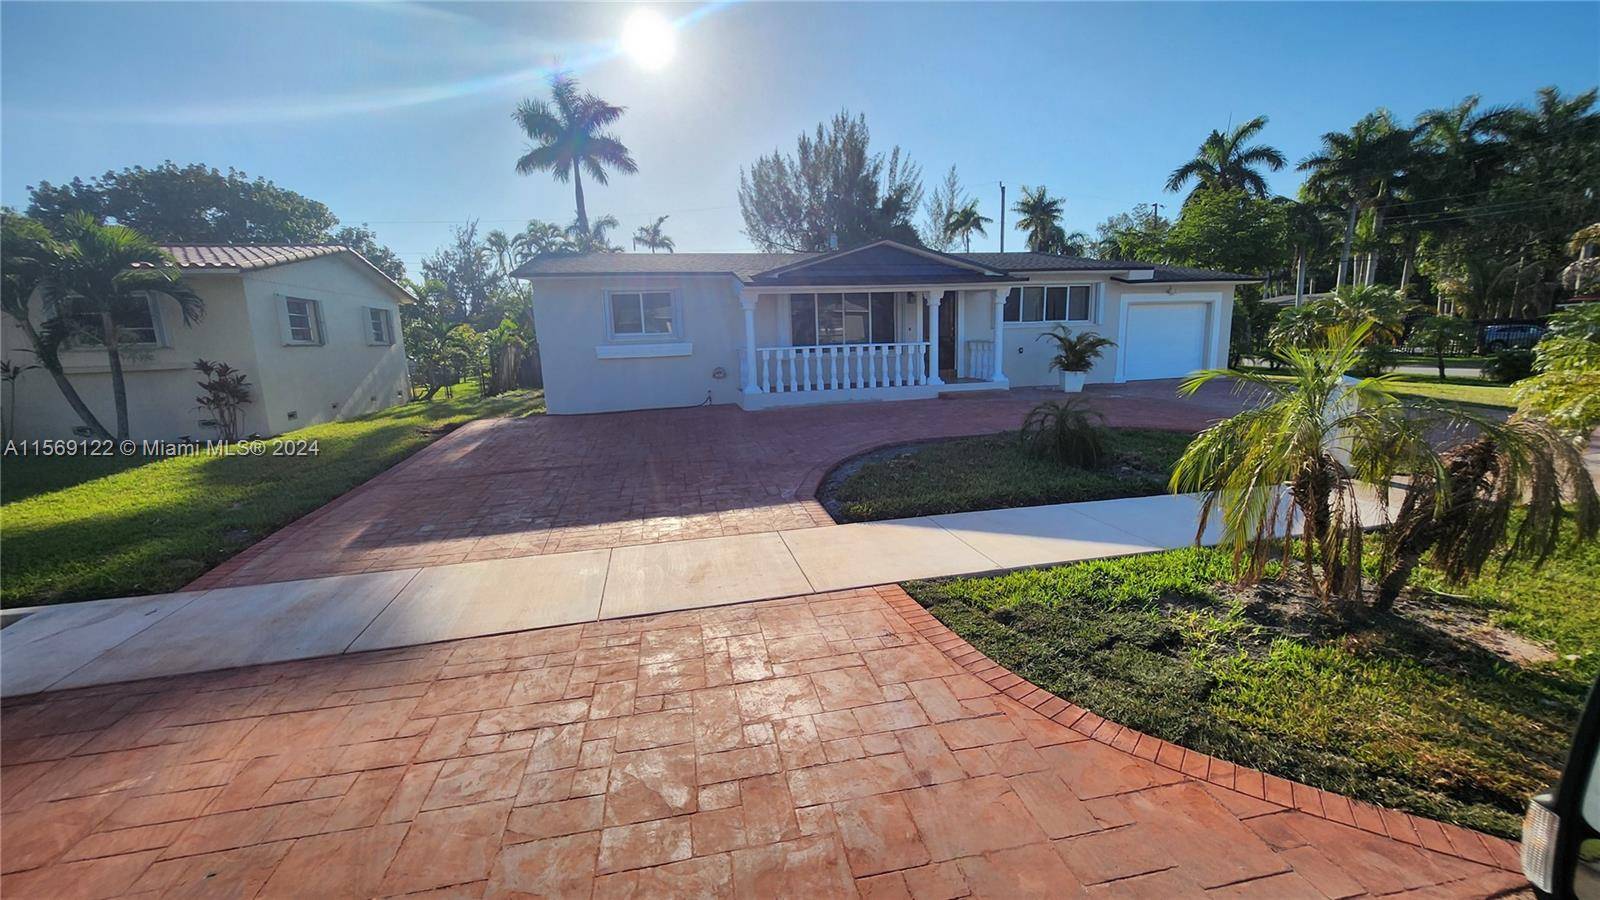 Spectacular property in excellent location with fast access to the heart of golden glades, near to the Marine and beach, space for boat and circular driveway, 3 excellent bedrooms, large ...